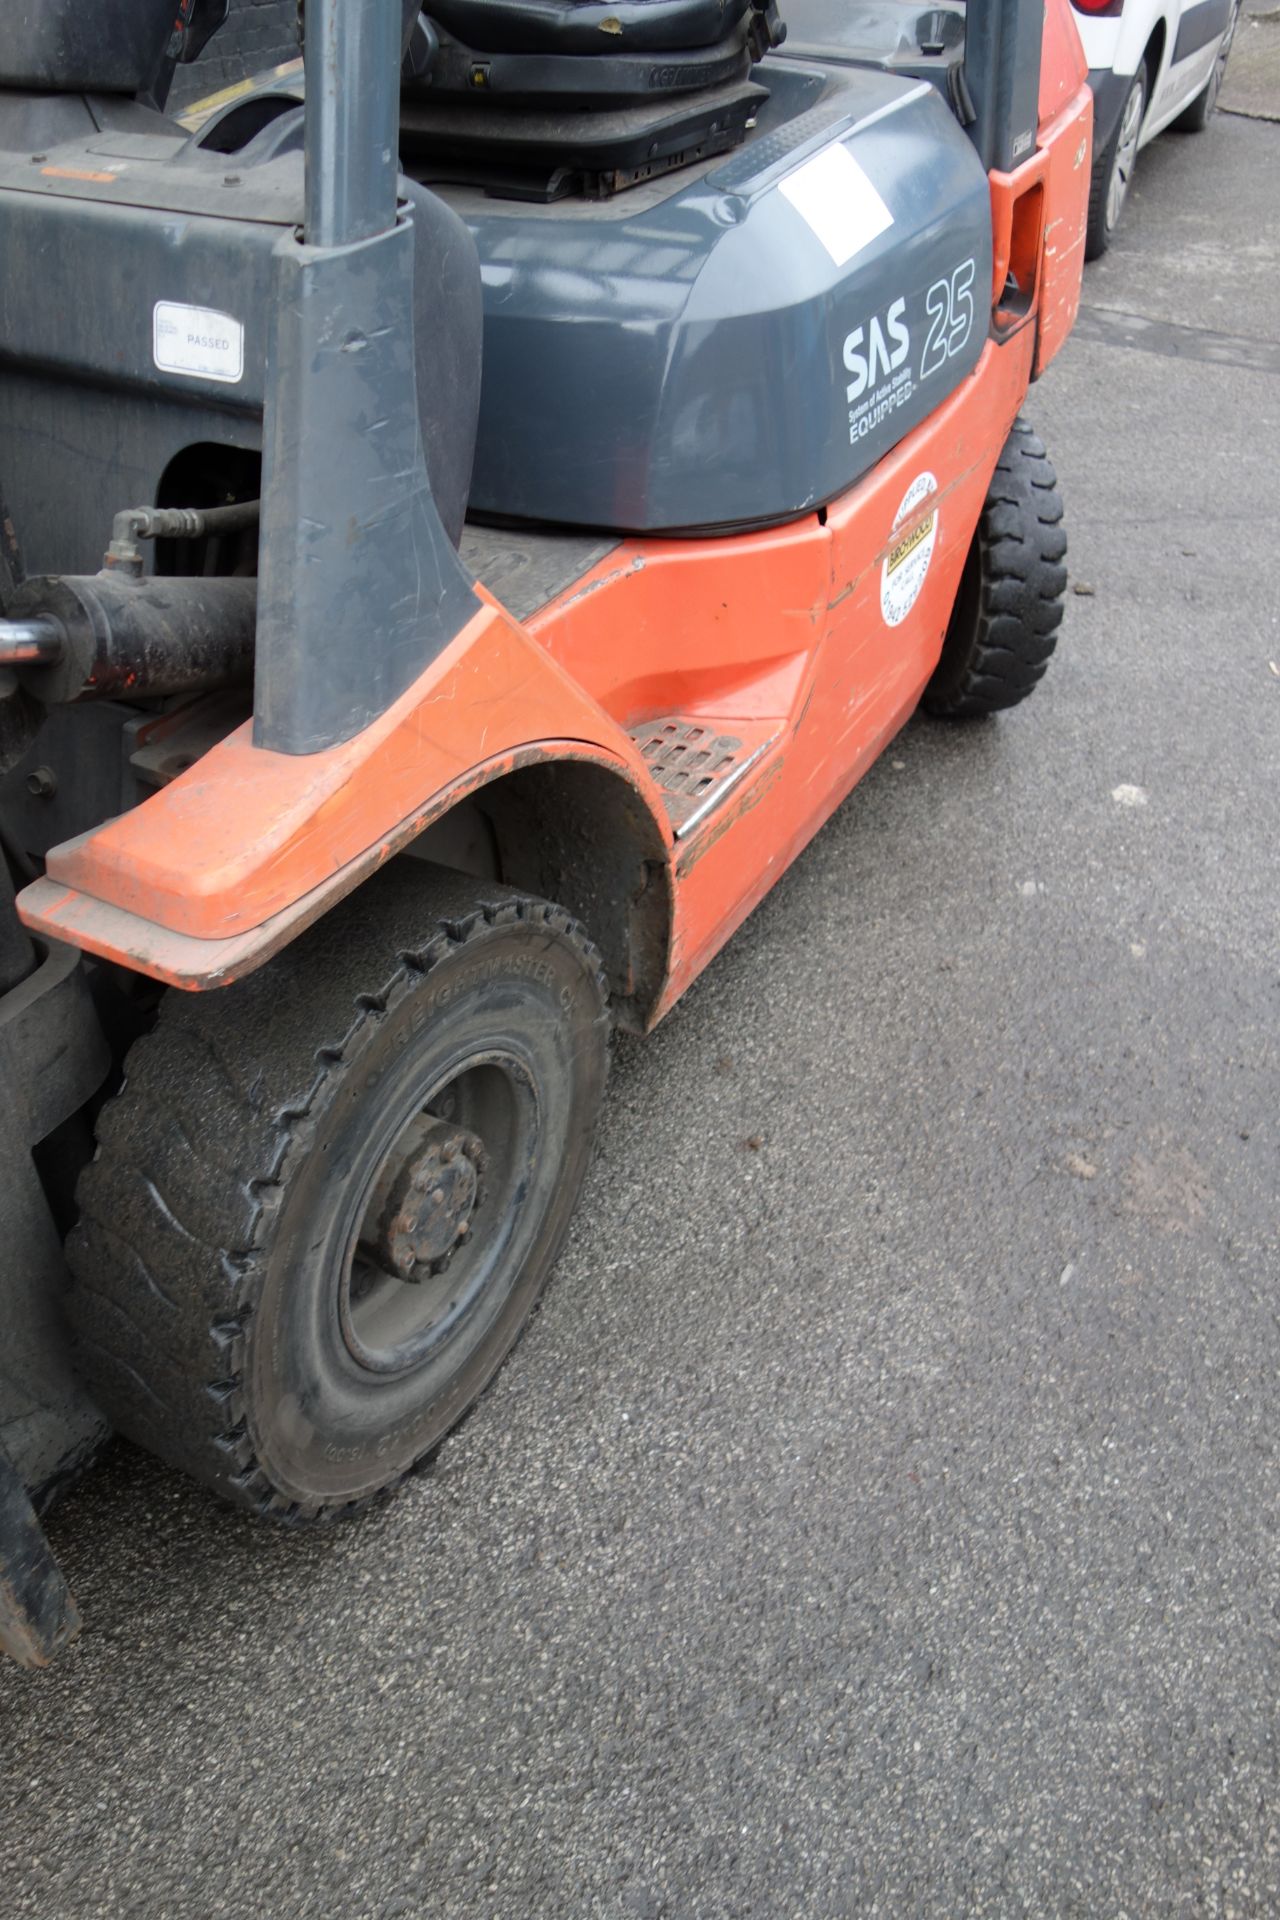 2003 Toyota 25 2.5 Tonne Diesel Forklift Truck. Max lift height. 4.1m. Side Shift. Full Working - Image 7 of 8